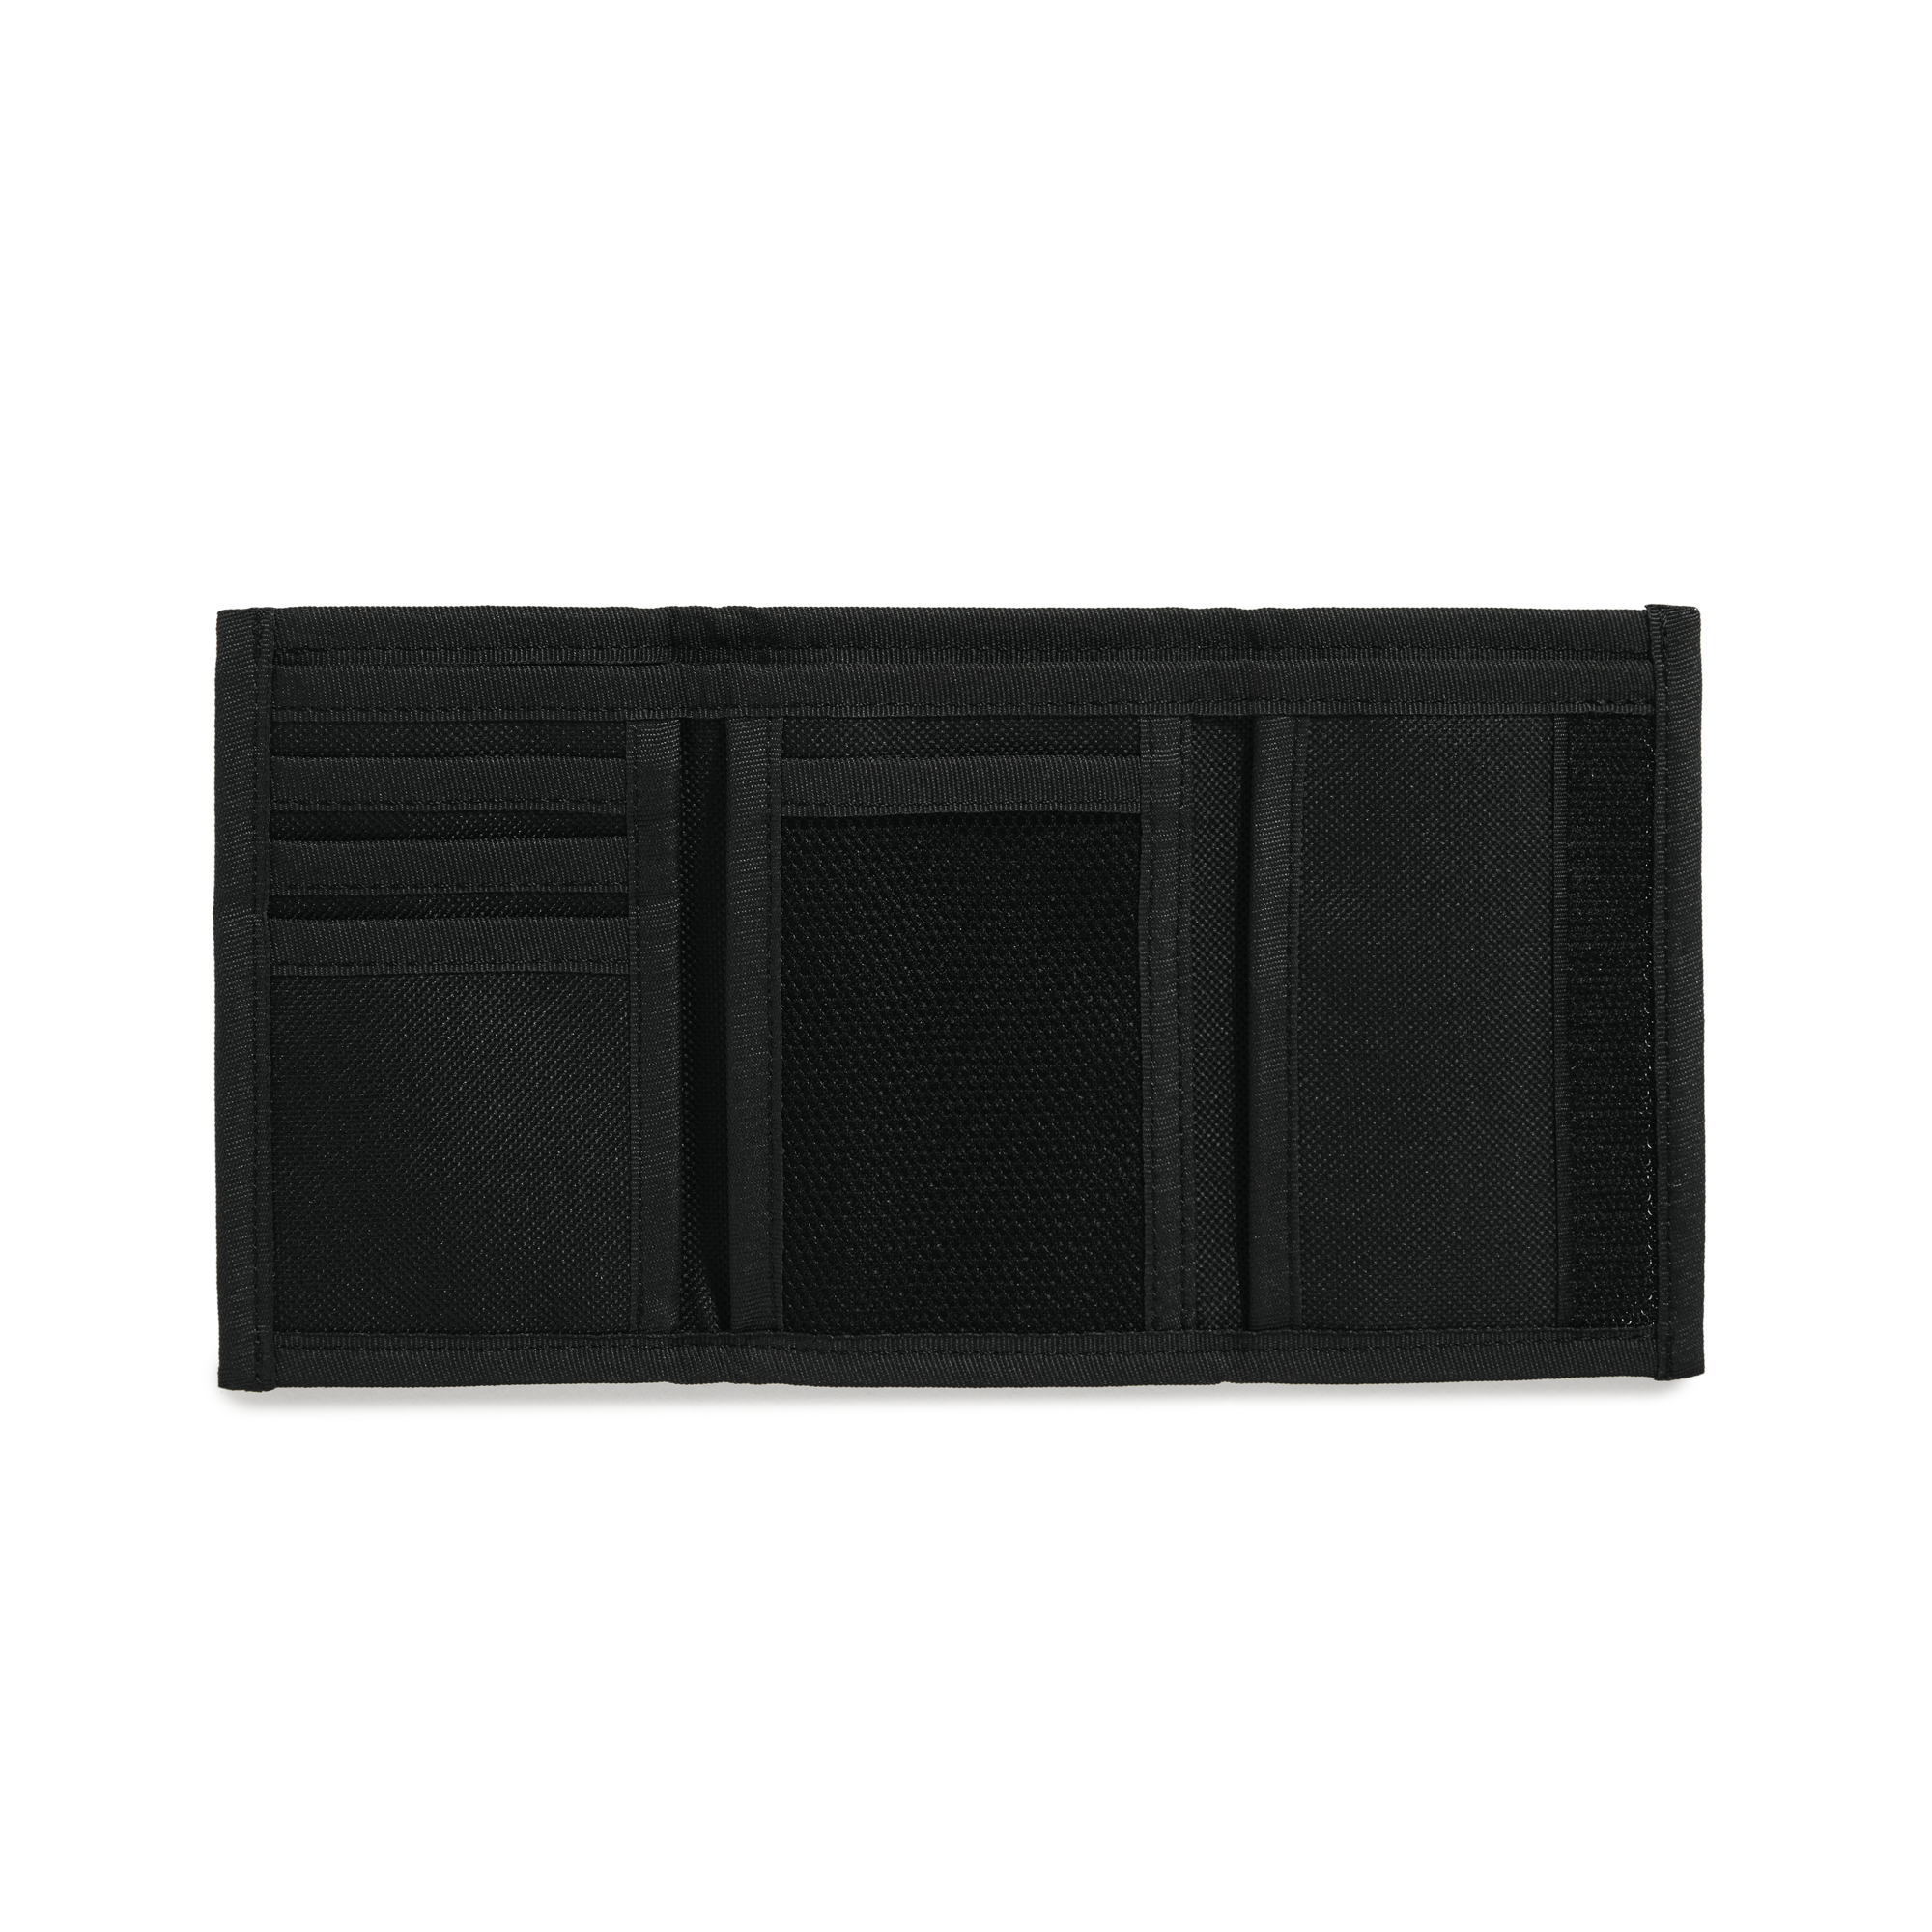 Black polar velcro wallet with grey logo on front. Card and cash pockets inside. Free uk shipping on orders over £50